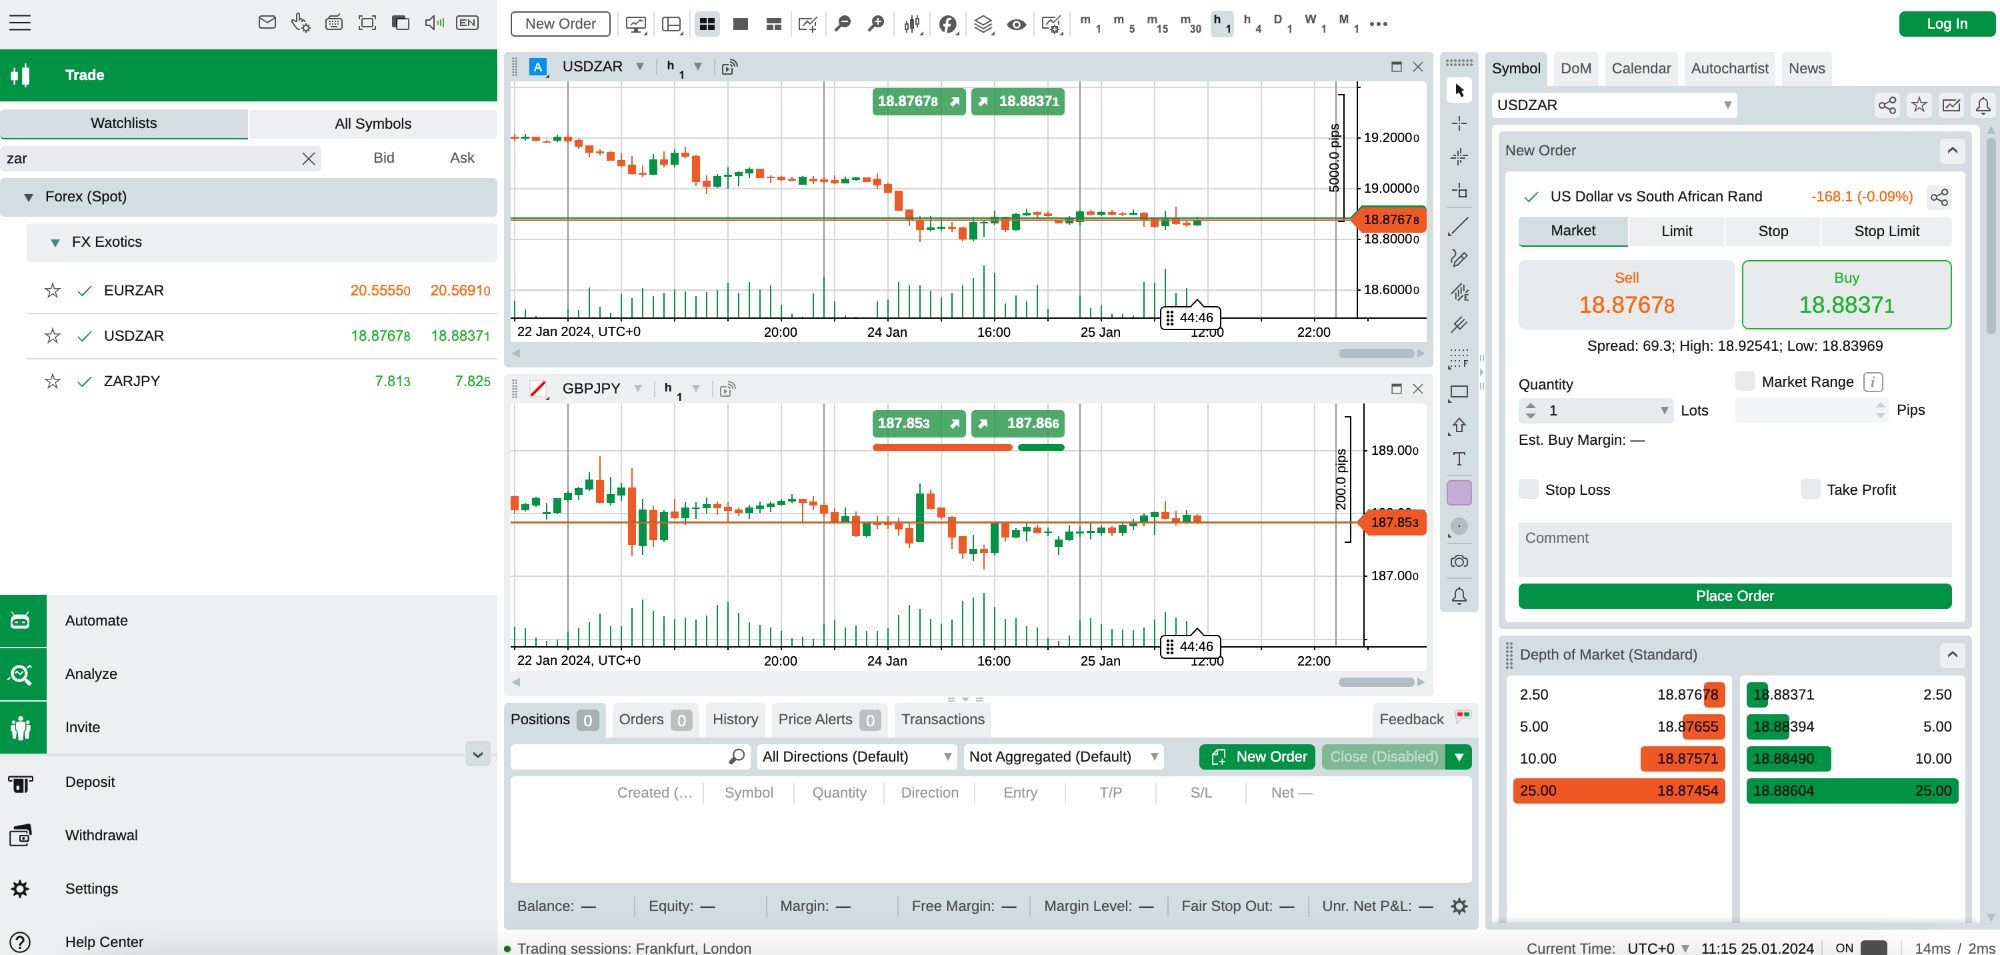 Day trading South African assets on Pepperstone cTrader charting platform